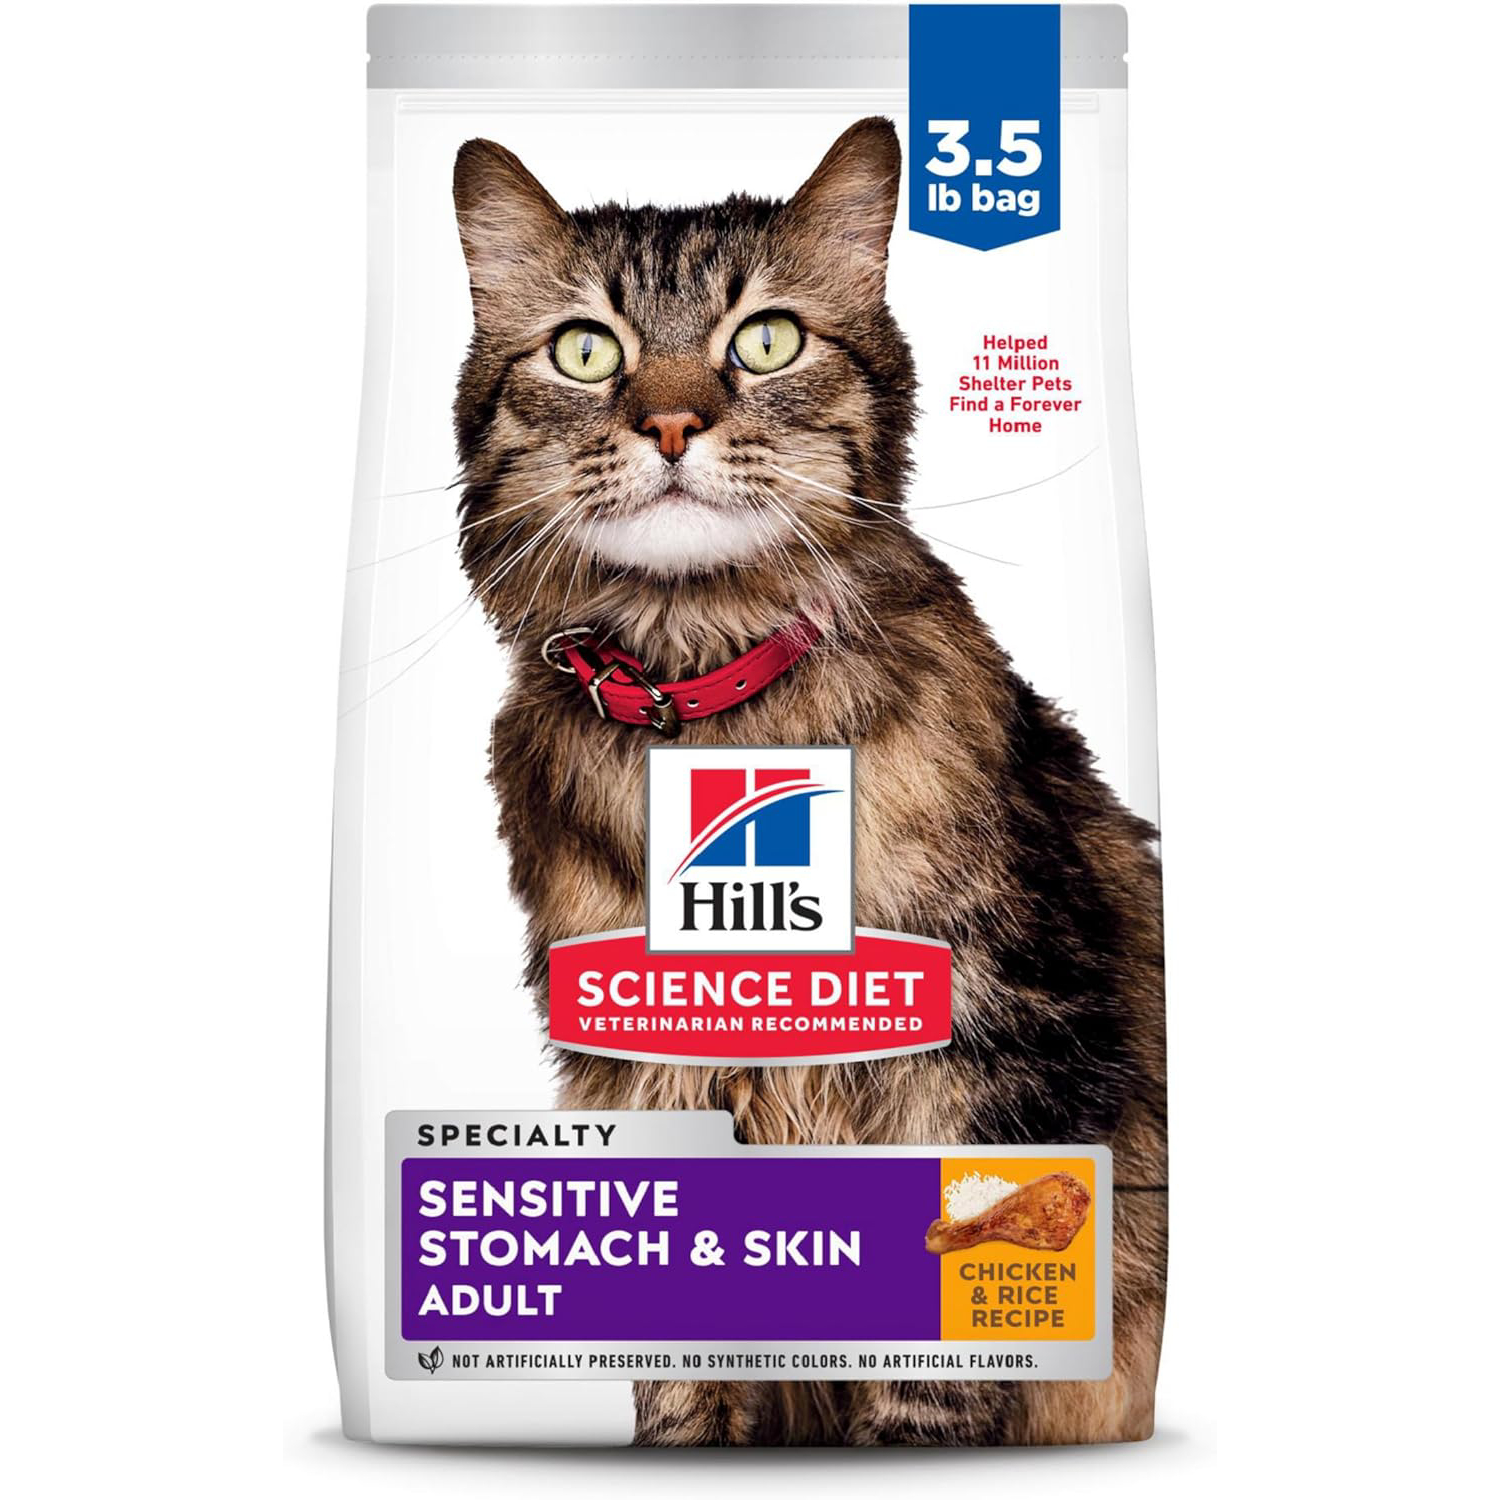 Hill_s Science Diet Dry Cat Food, Adult, Sensitive Stomach & Skin, Chicken & Rice Recipe, 3.5 lb. Bag new